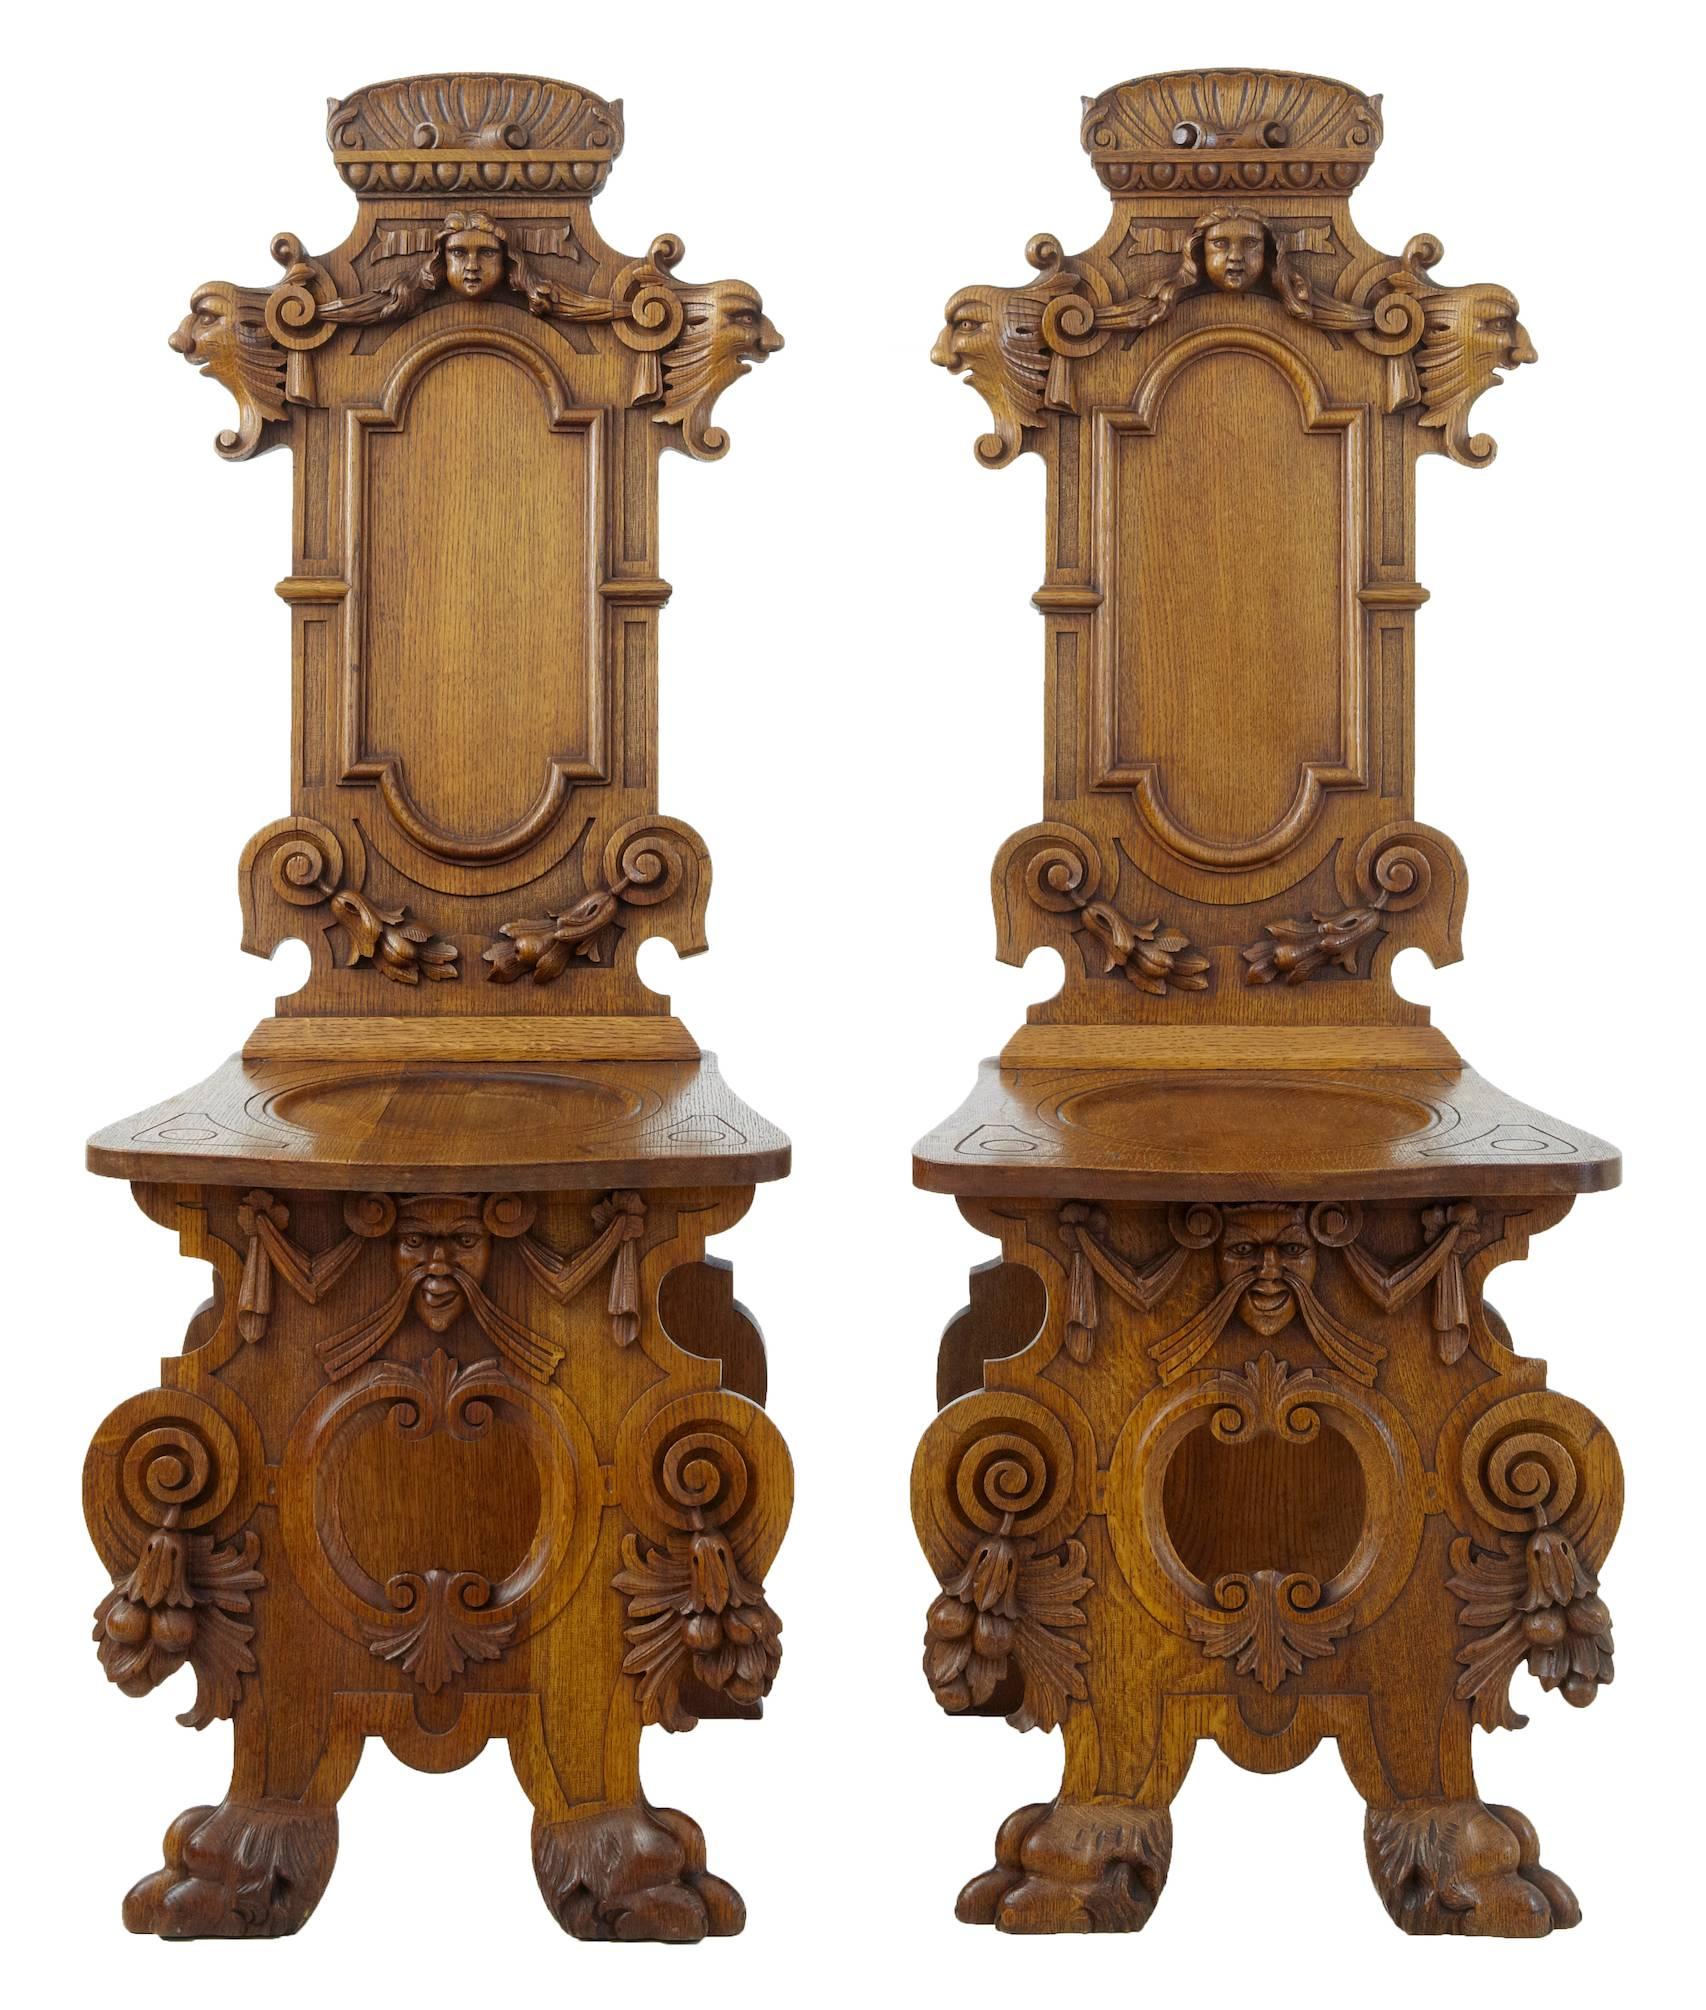 Pair of Flemish carved golden oak hall chairs, circa 1890.
Profusely carved with heads, swags and foliage.
Dished seat.
Nice rich golden oak color

Height: 46 1/2